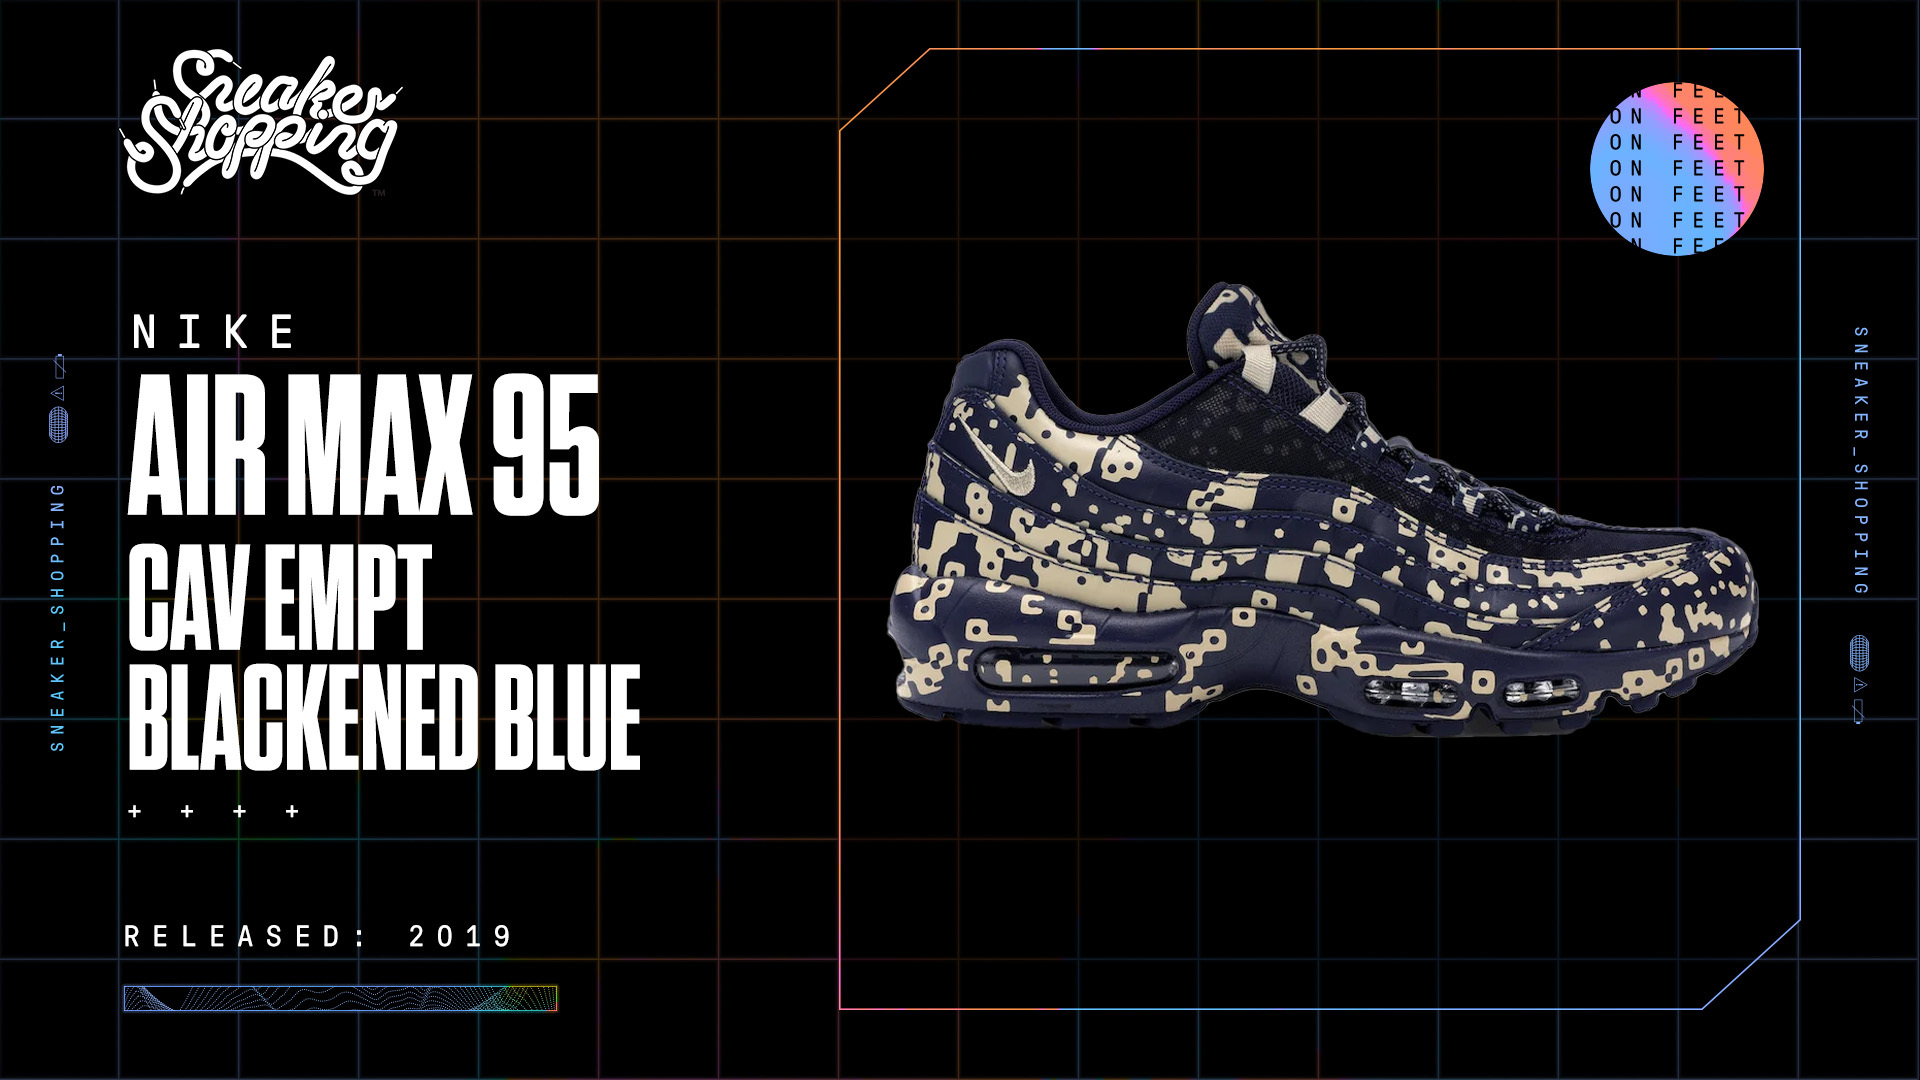 Nike Air Max 95 Cav Empt Blackened Blue sneakers with graffiti-style pattern. Released: 2019